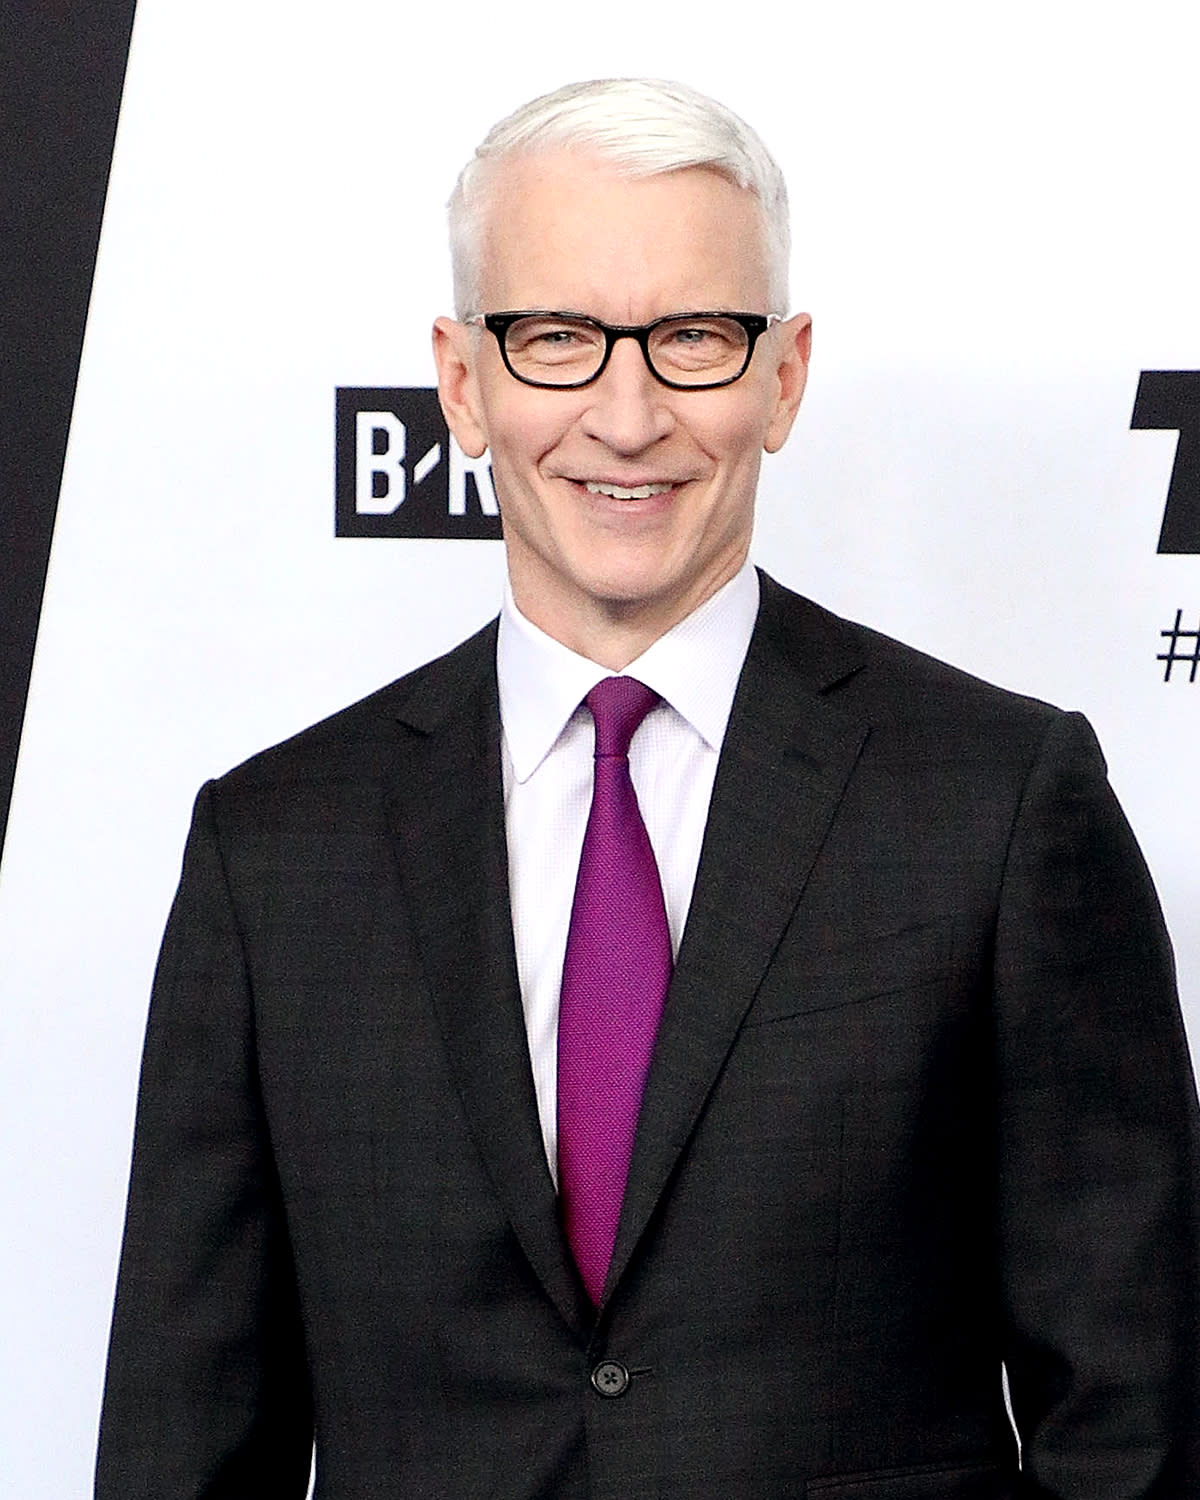 Anderson Cooper attends the 2018 Turner Upfront at One Penn Plaza on May 16, 2018, in New York City. (Photo: Taylor Hill/FilmMagic)